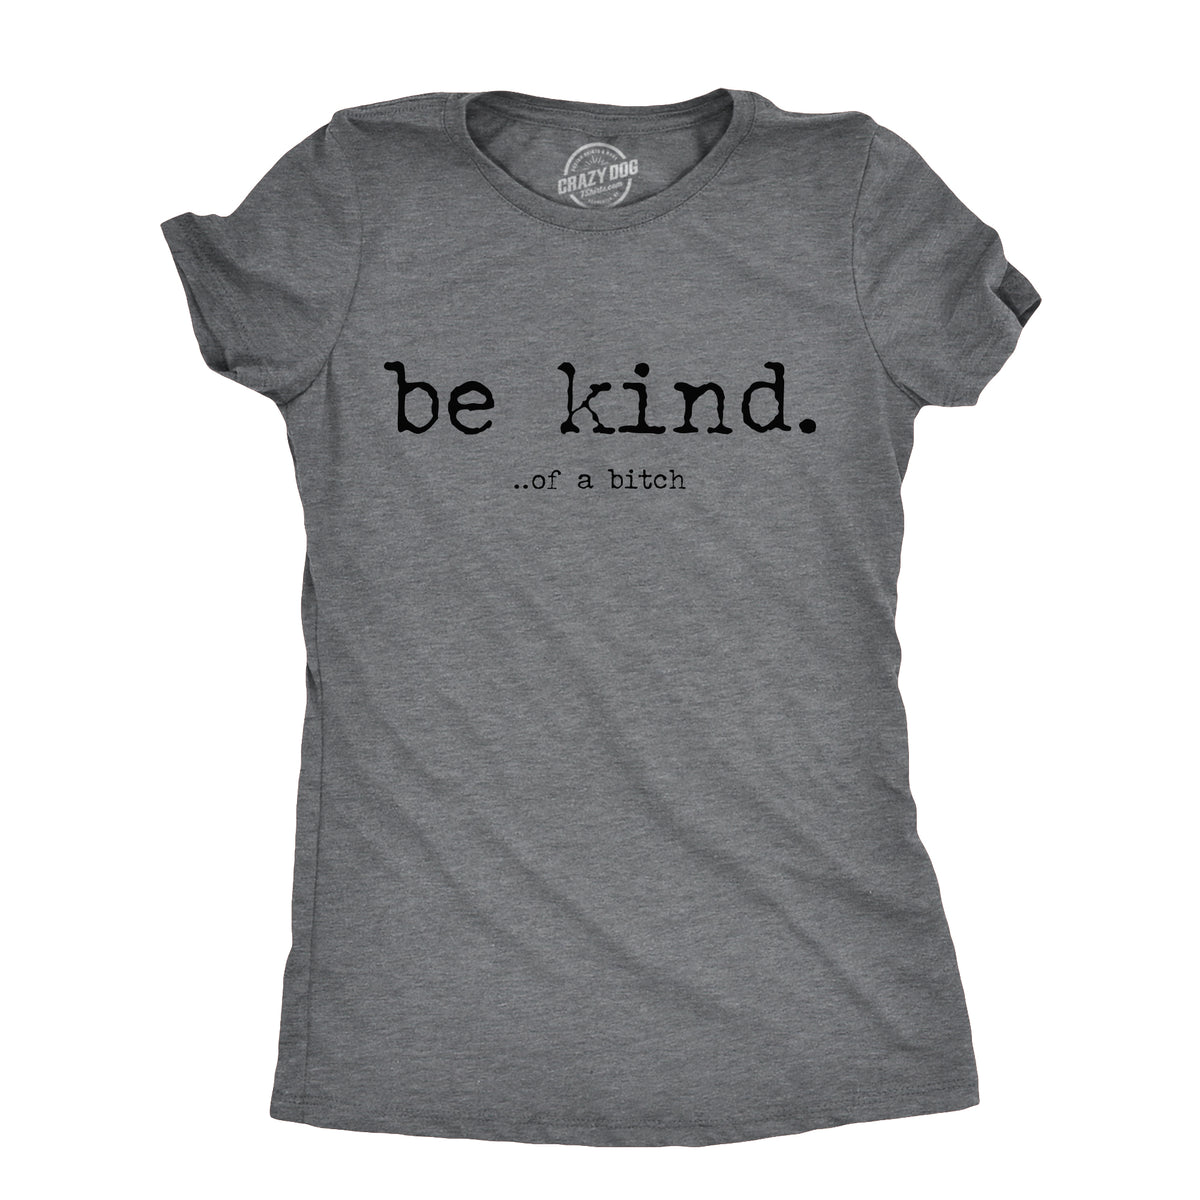 Funny Dark Heather Grey - Be Kind Be Kind Of A Bitch Womens T Shirt Nerdy Sarcastic Tee